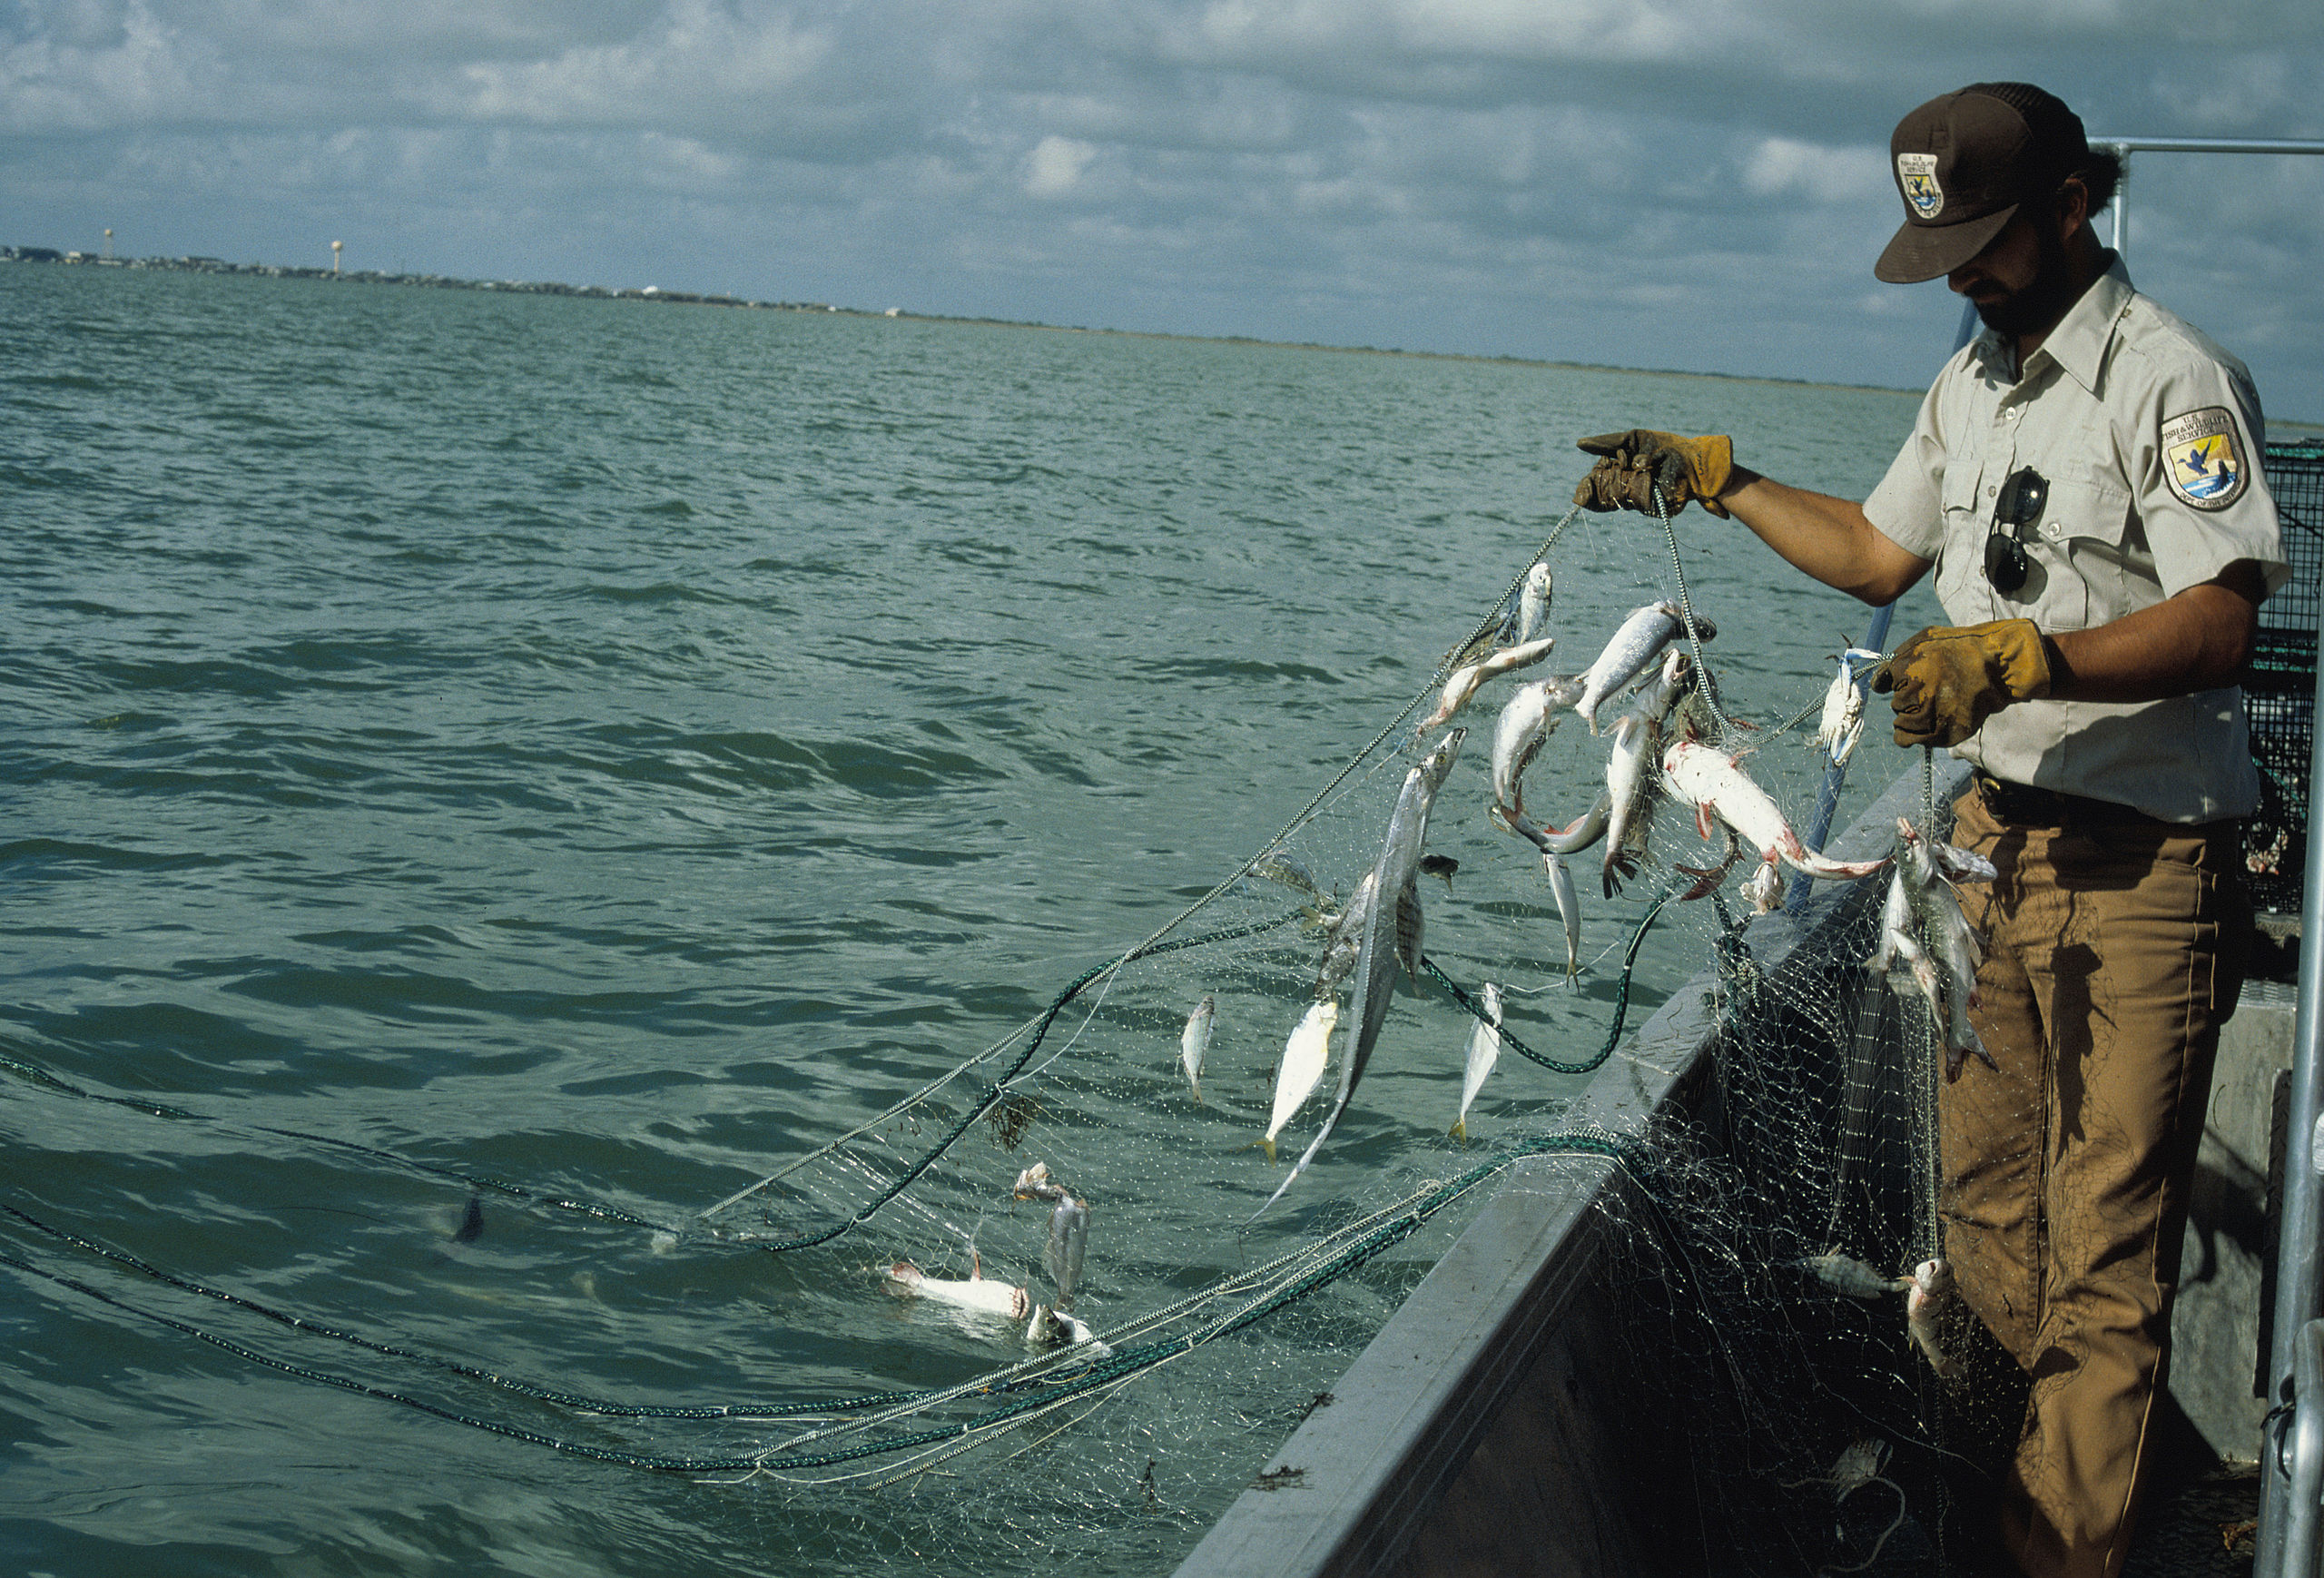 https://upload.wikimedia.org/wikipedia/commons/thumb/6/66/Fish_and_Wildlife_Service_worker_on_boat_checking_gill_net_full_of_fish.jpg/2560px-Fish_and_Wildlife_Service_worker_on_boat_checking_gill_net_full_of_fish.jpg